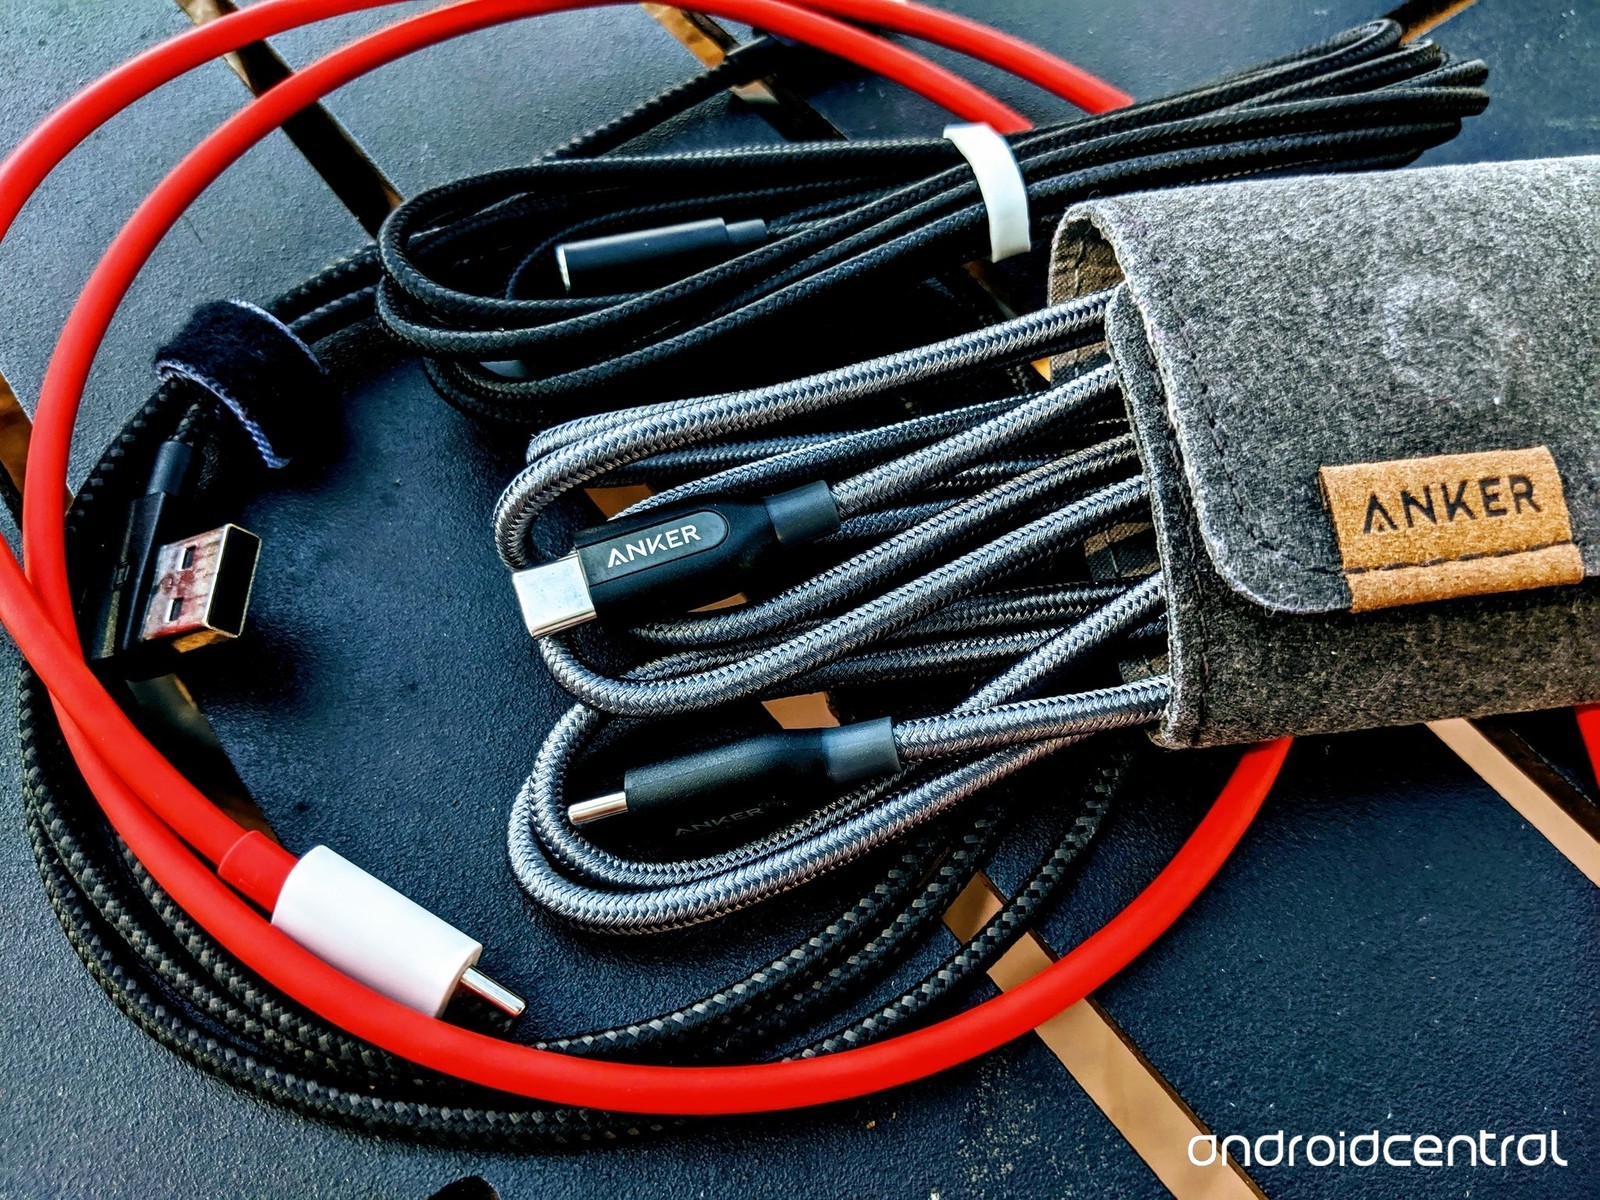 Cloom Published a “5 Things You Should Look For When Choosing Cables”